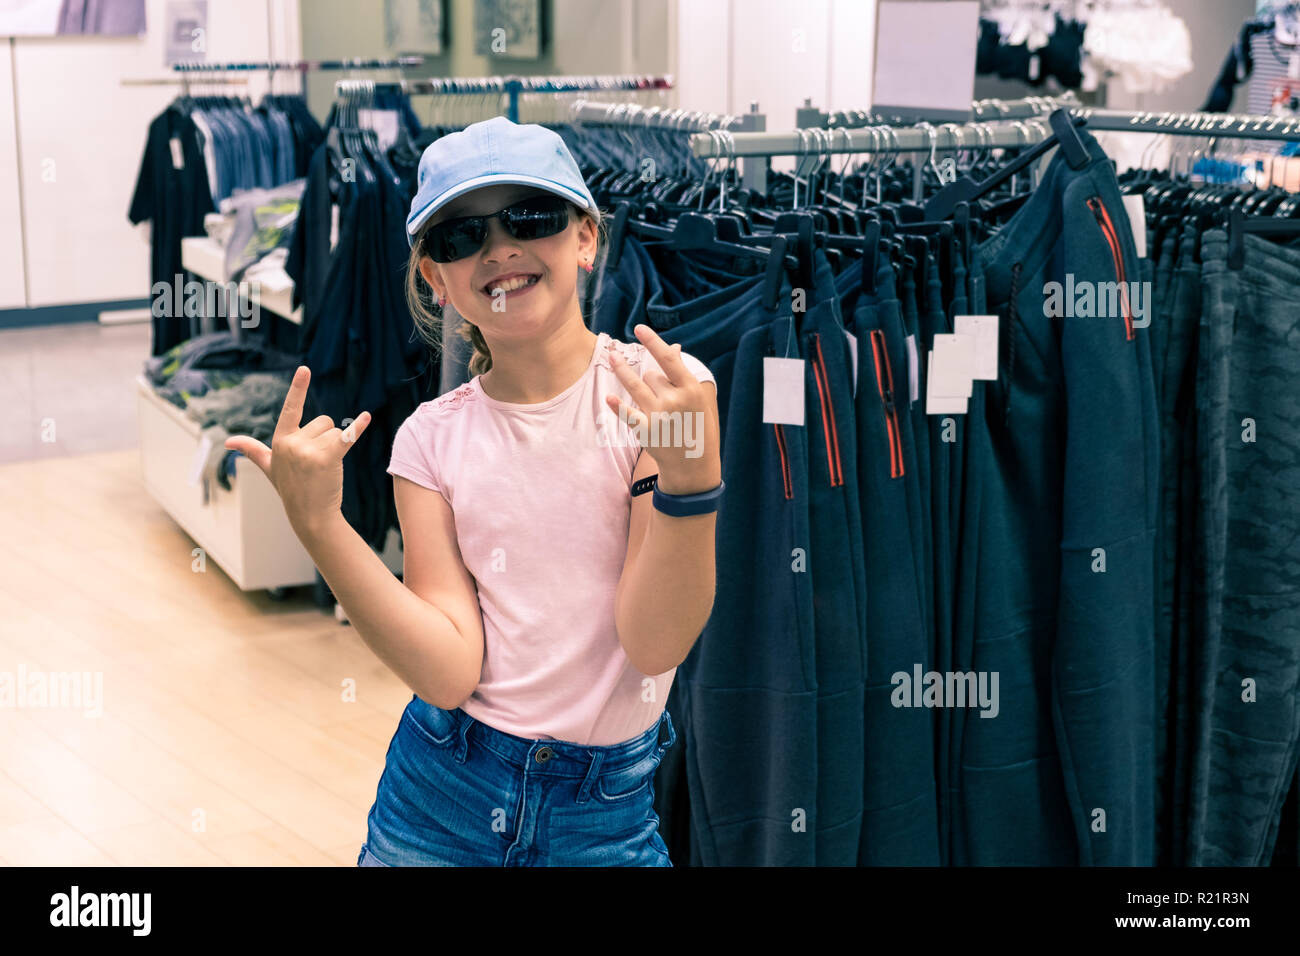 Portrait of young trendy girl with pink t-shirt, sunglasses and baseball cap in department store Stock Photo